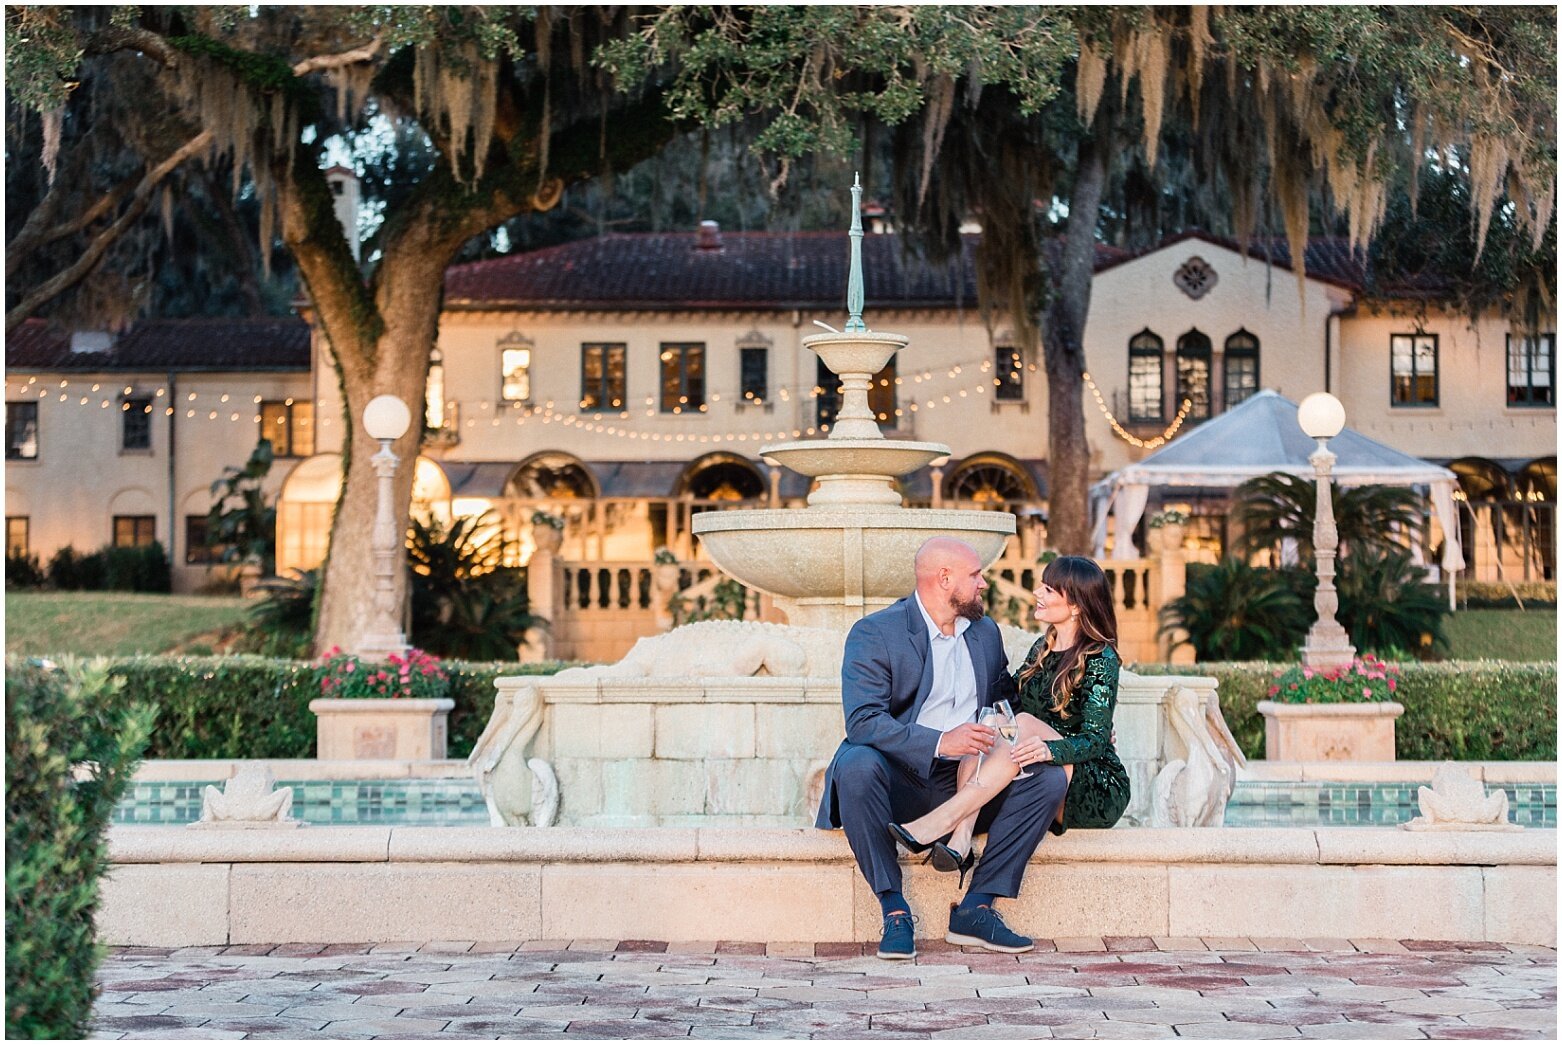 Mediterranean  looking session during engagement photoshoot in jacksonville fl